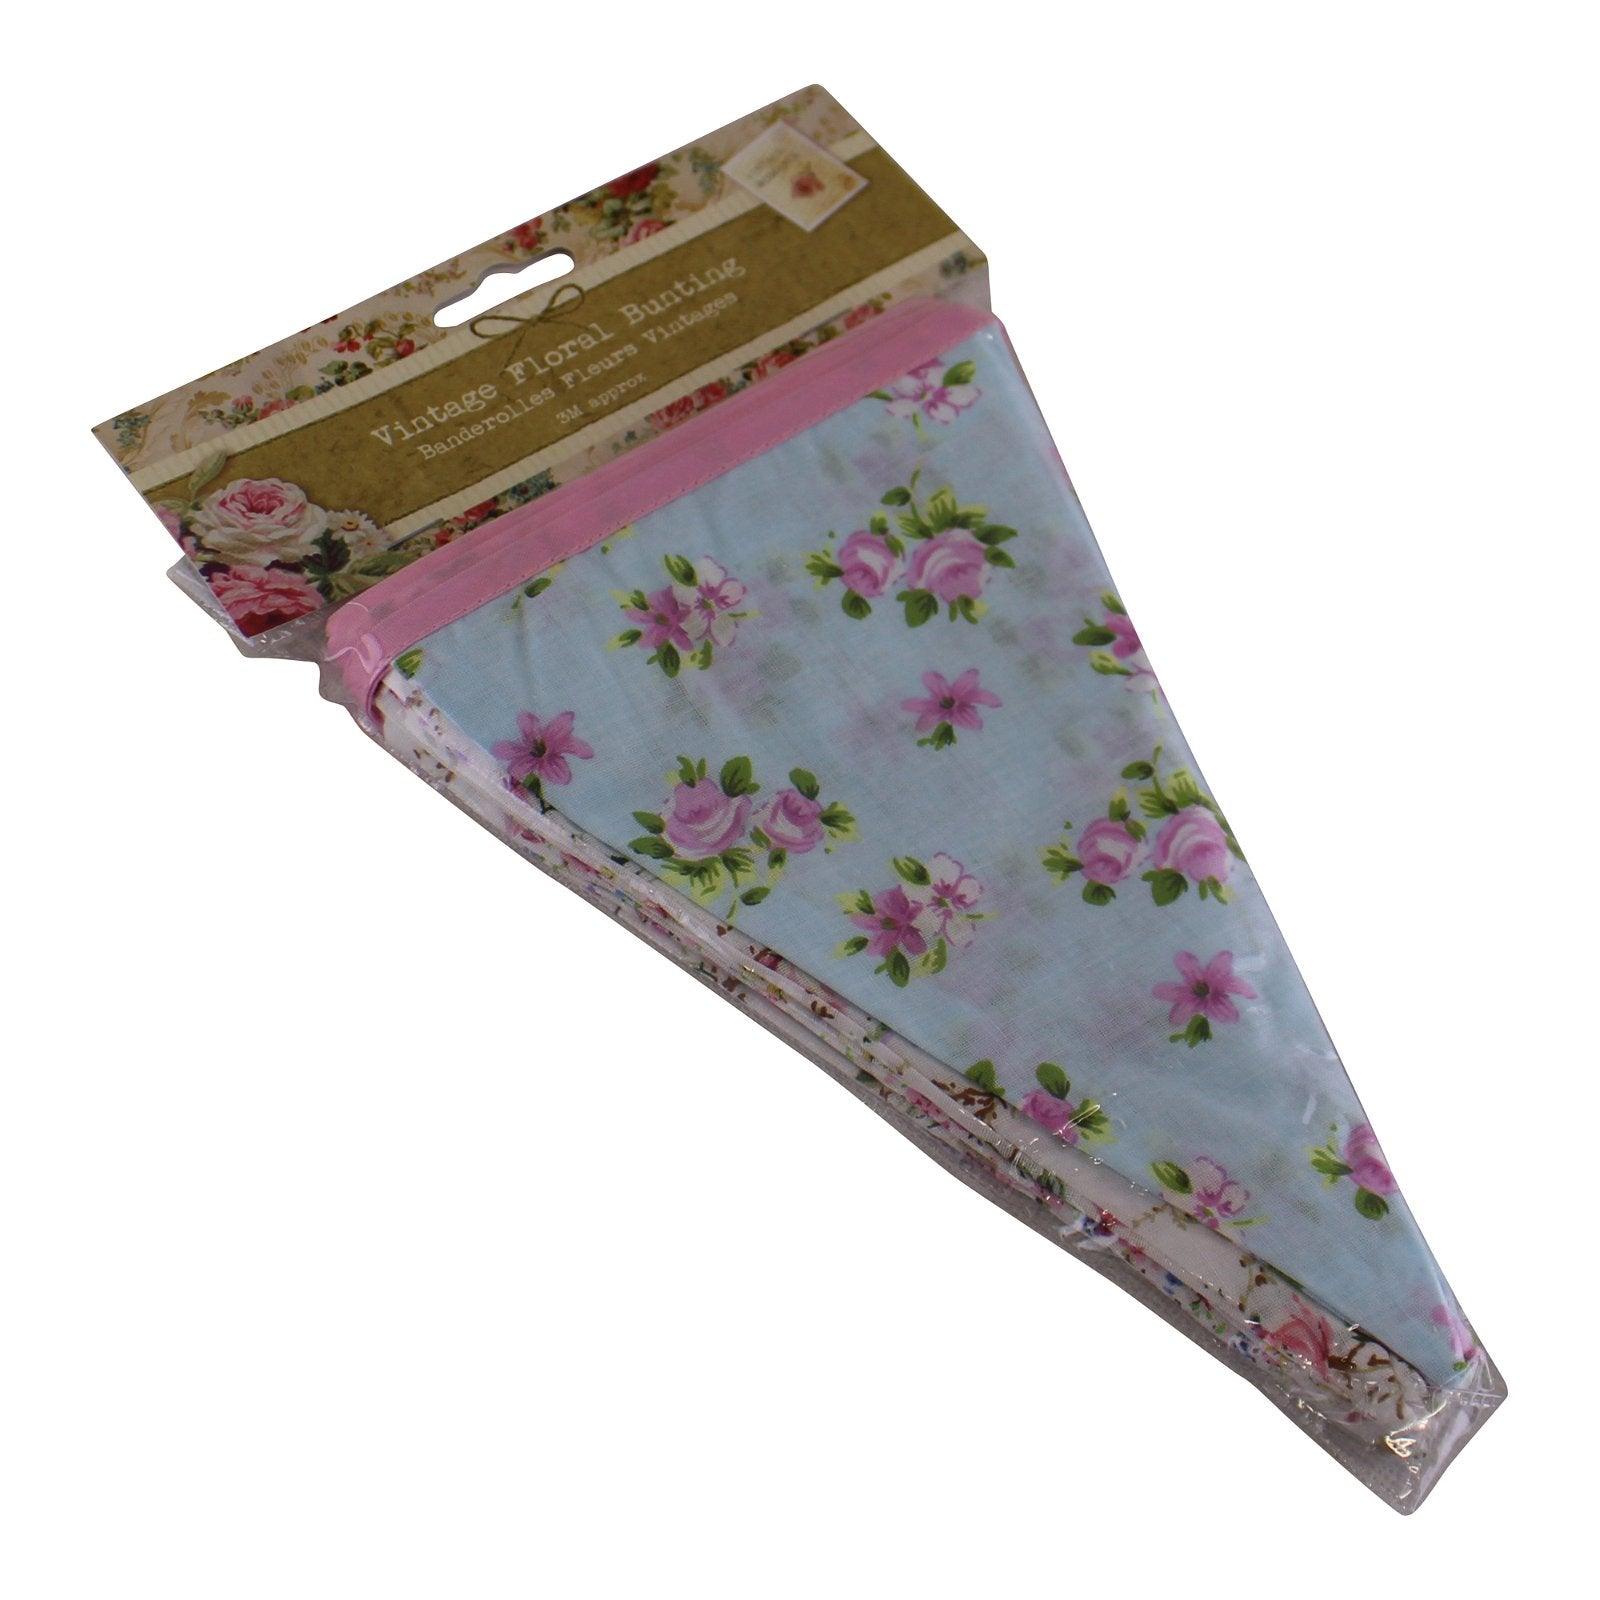 Vintage Style Floral Fabric Bunting, 3 metres - £18.99 - Ornaments 